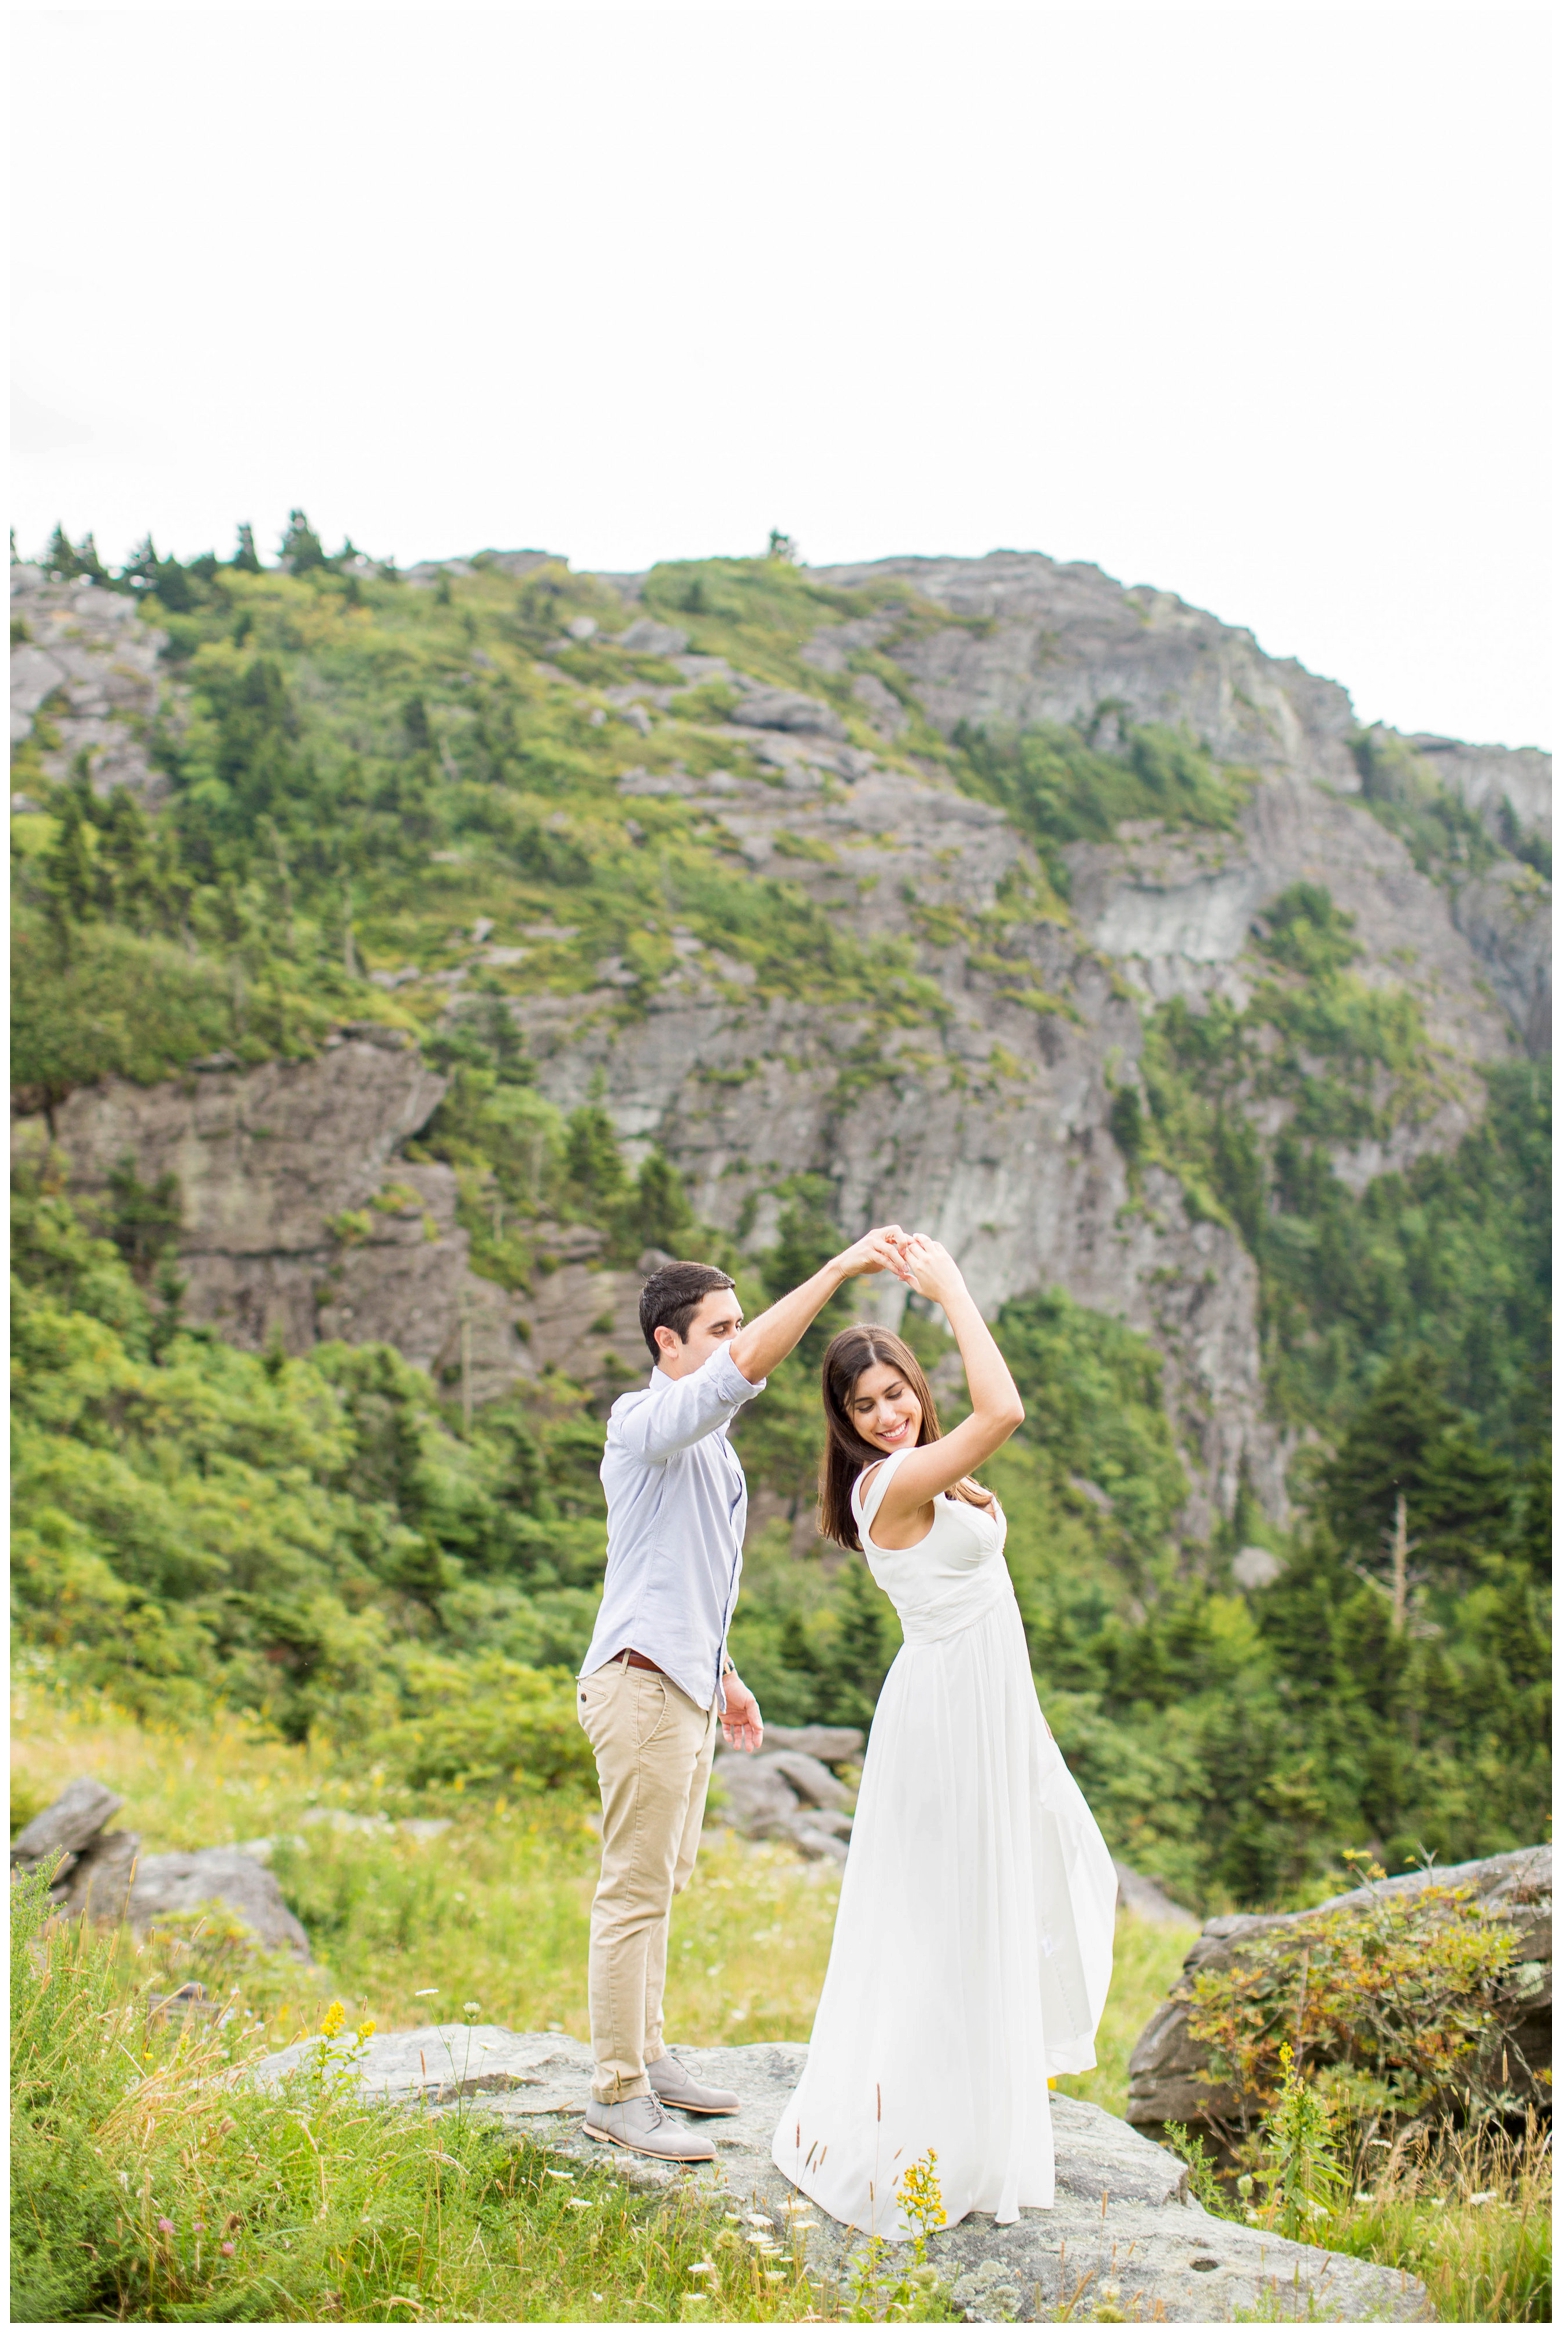 View More: http://hopetaylorphotographyphotos.pass.us/kristen-and-anthony-engagement